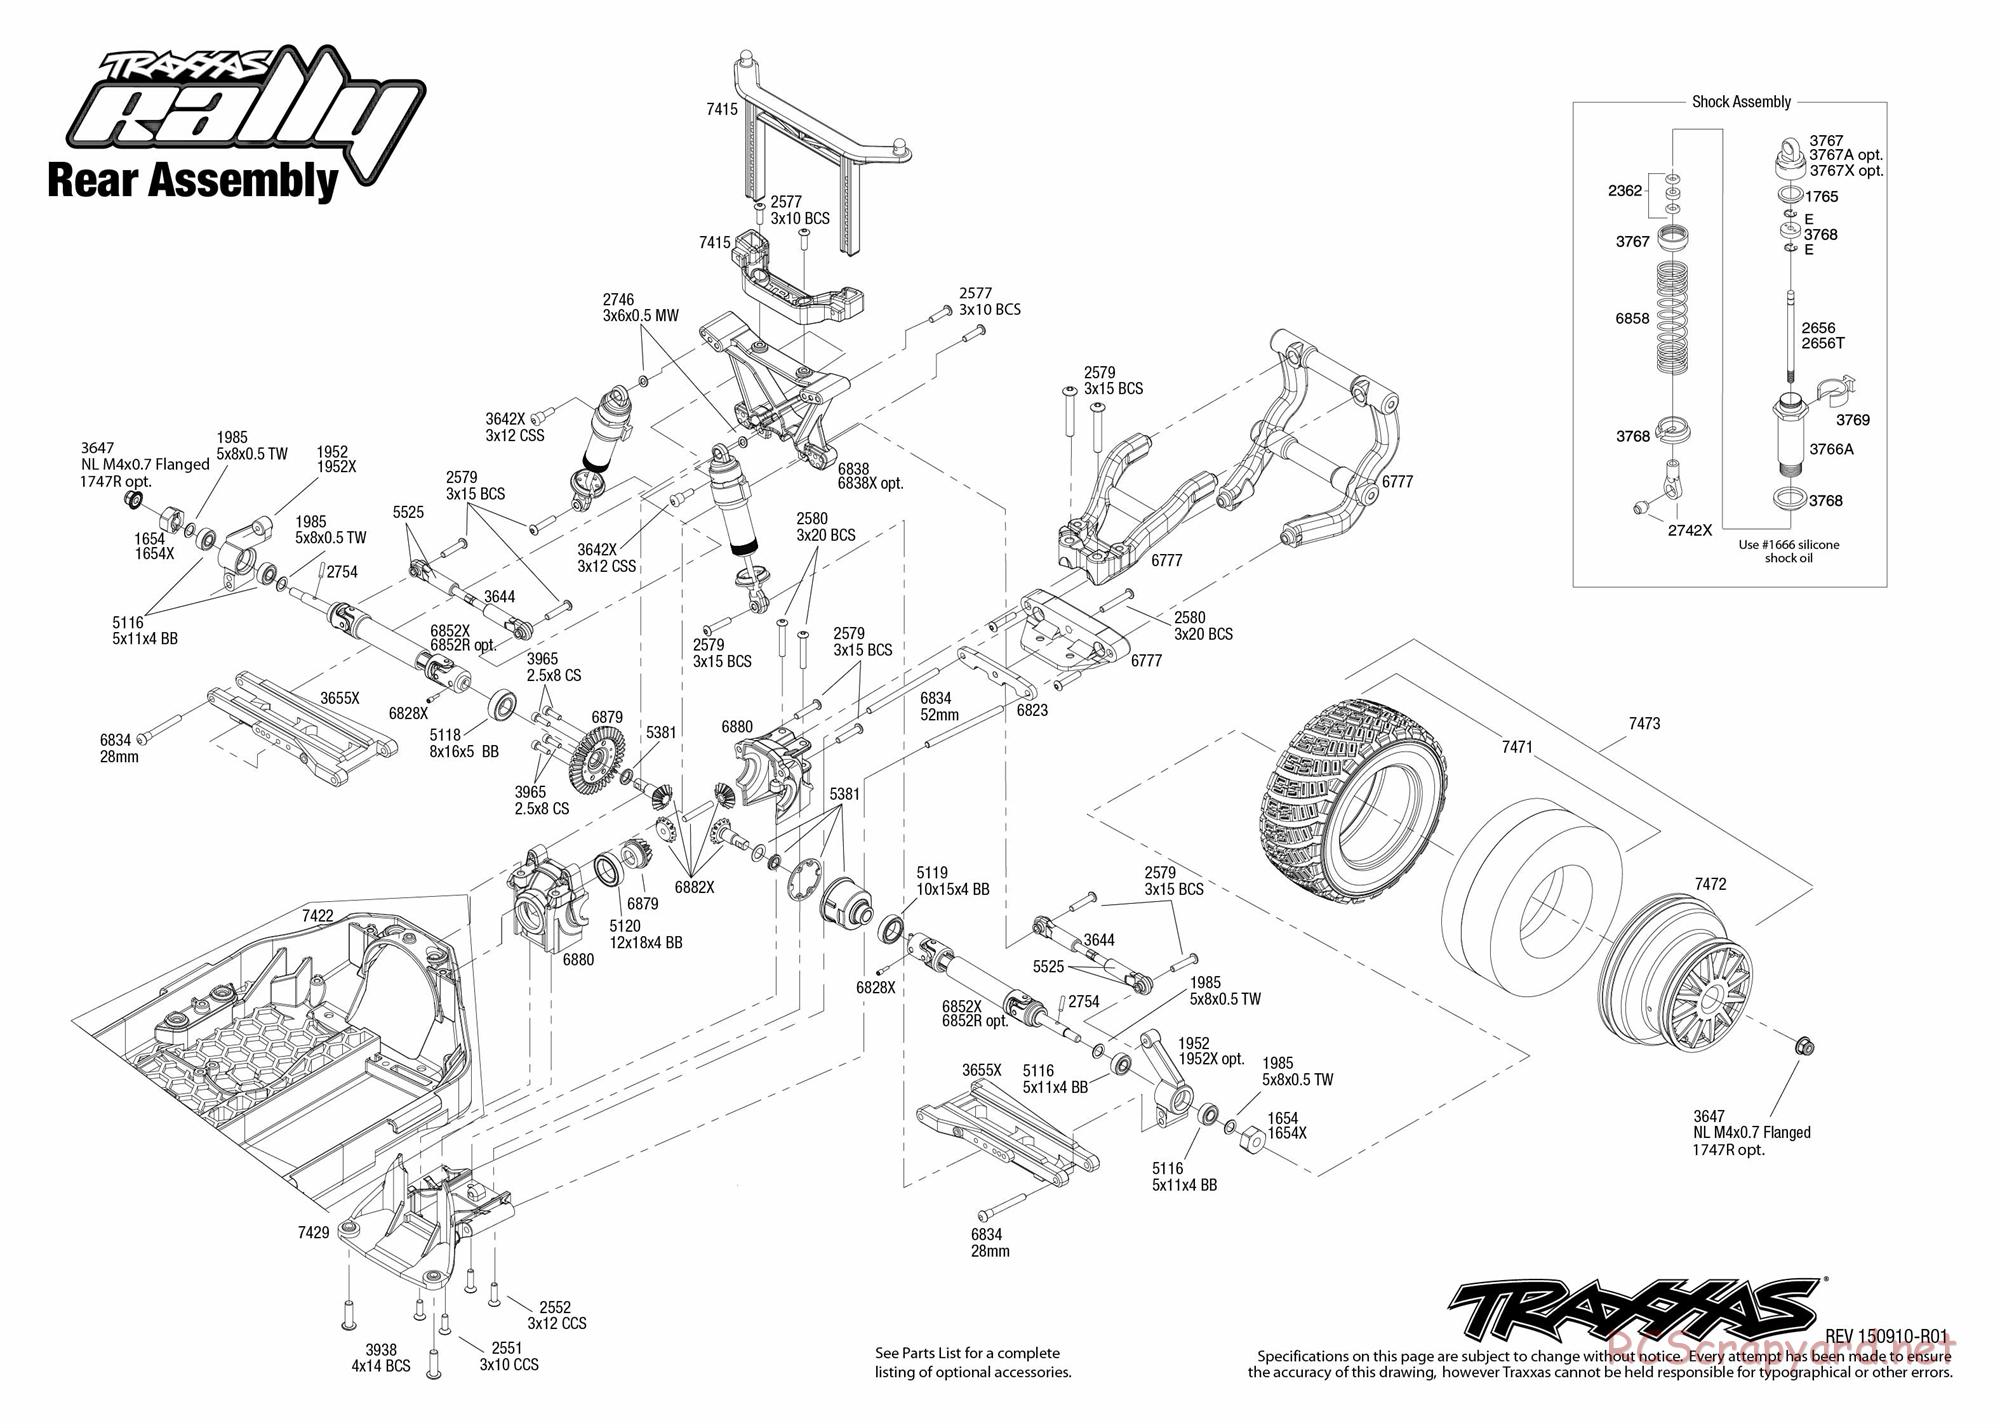 Traxxas - Rally (2015) - Exploded Views - Page 4